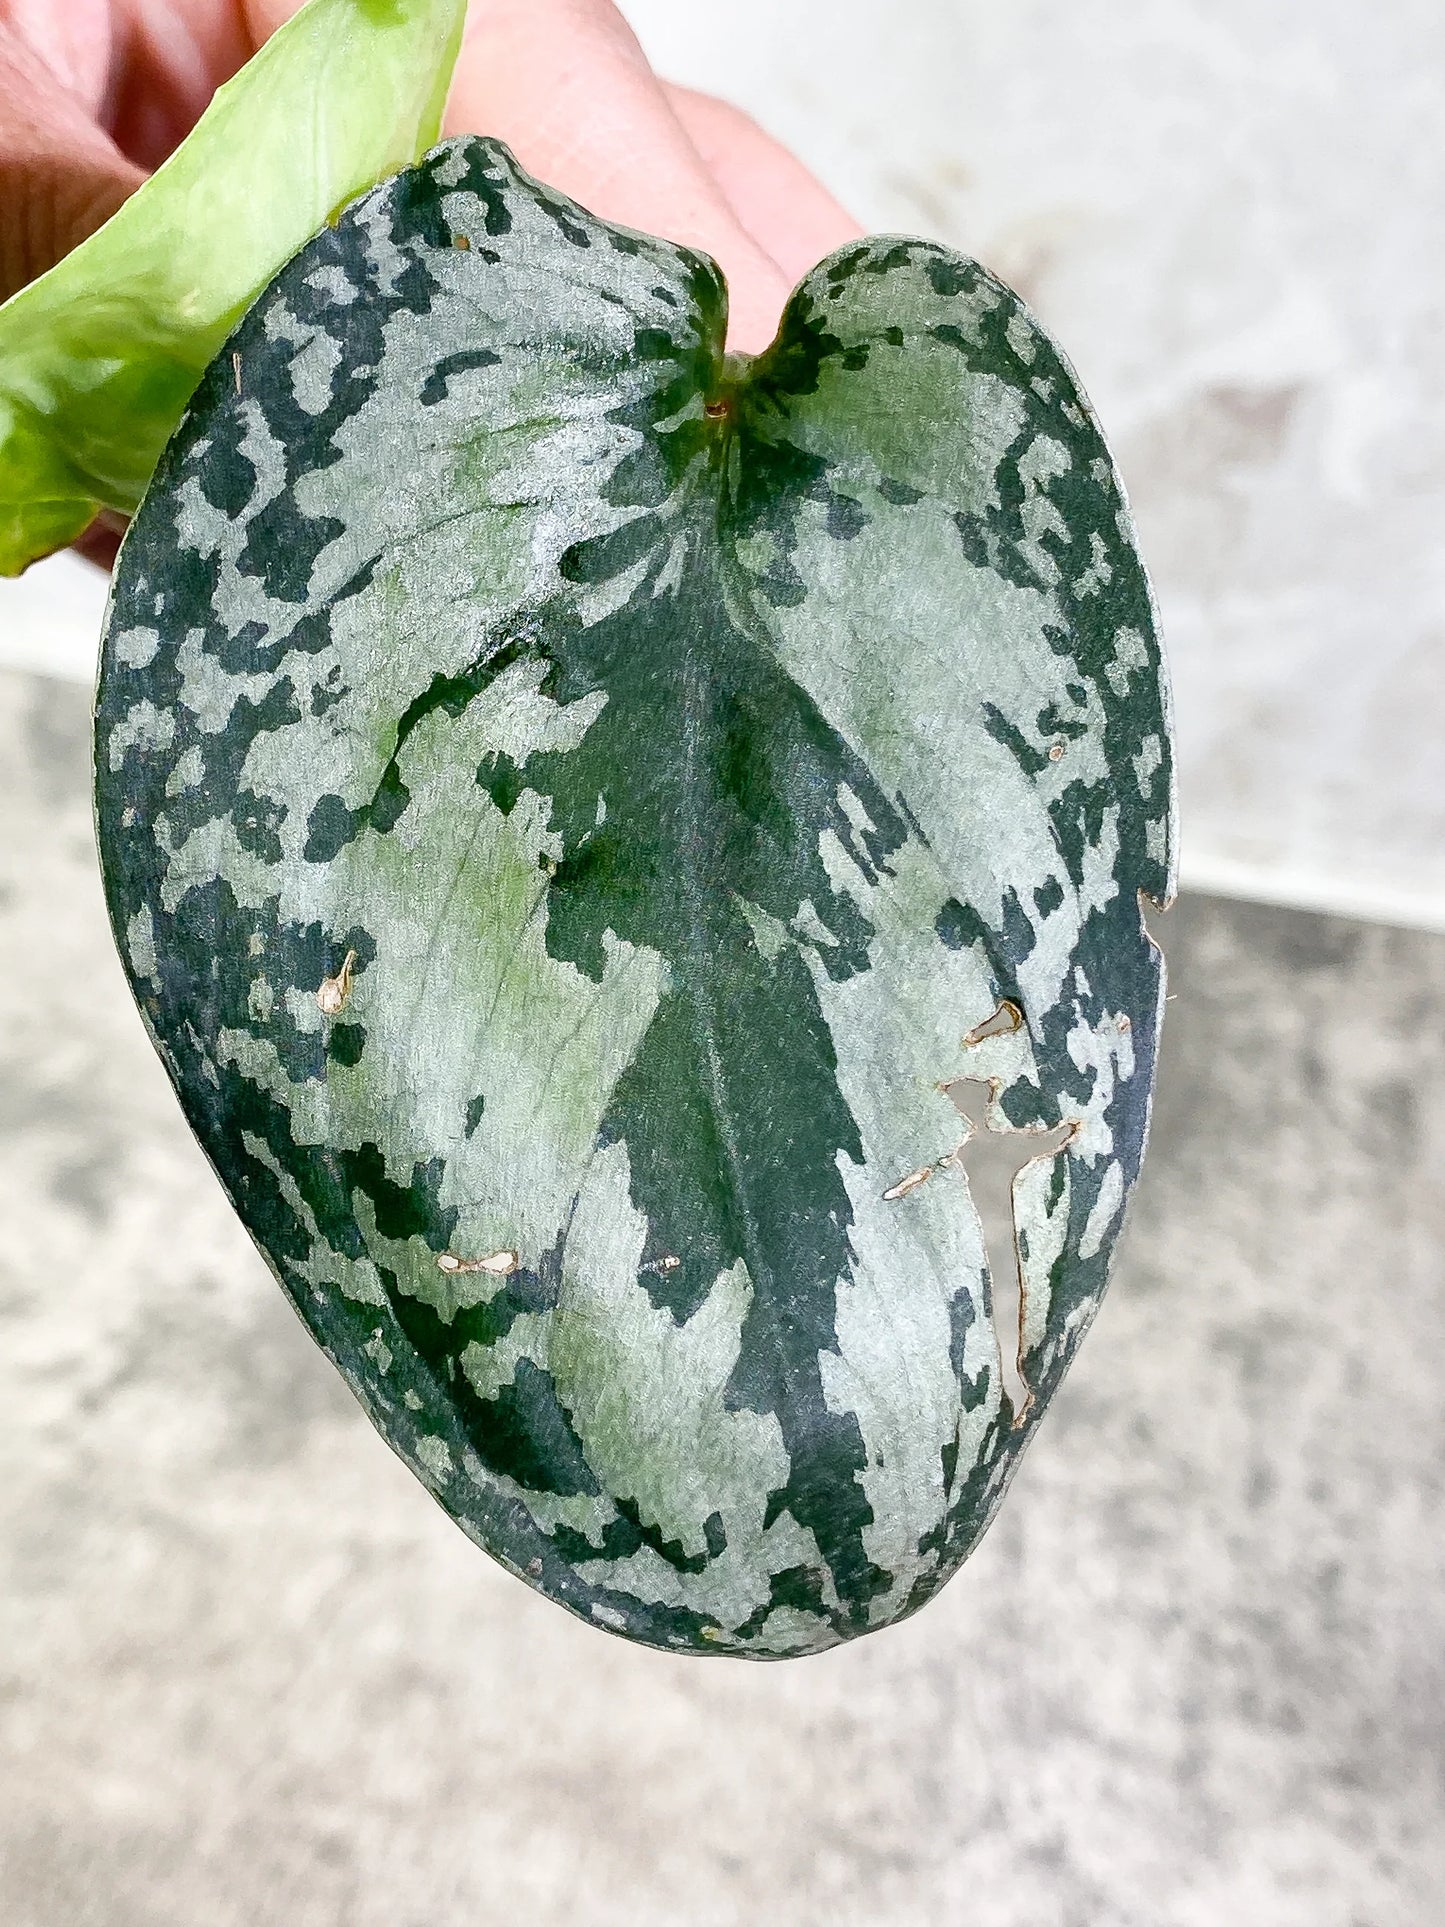 Scindapsus Silver Princess 1 leaf 1 growth point fully rooted